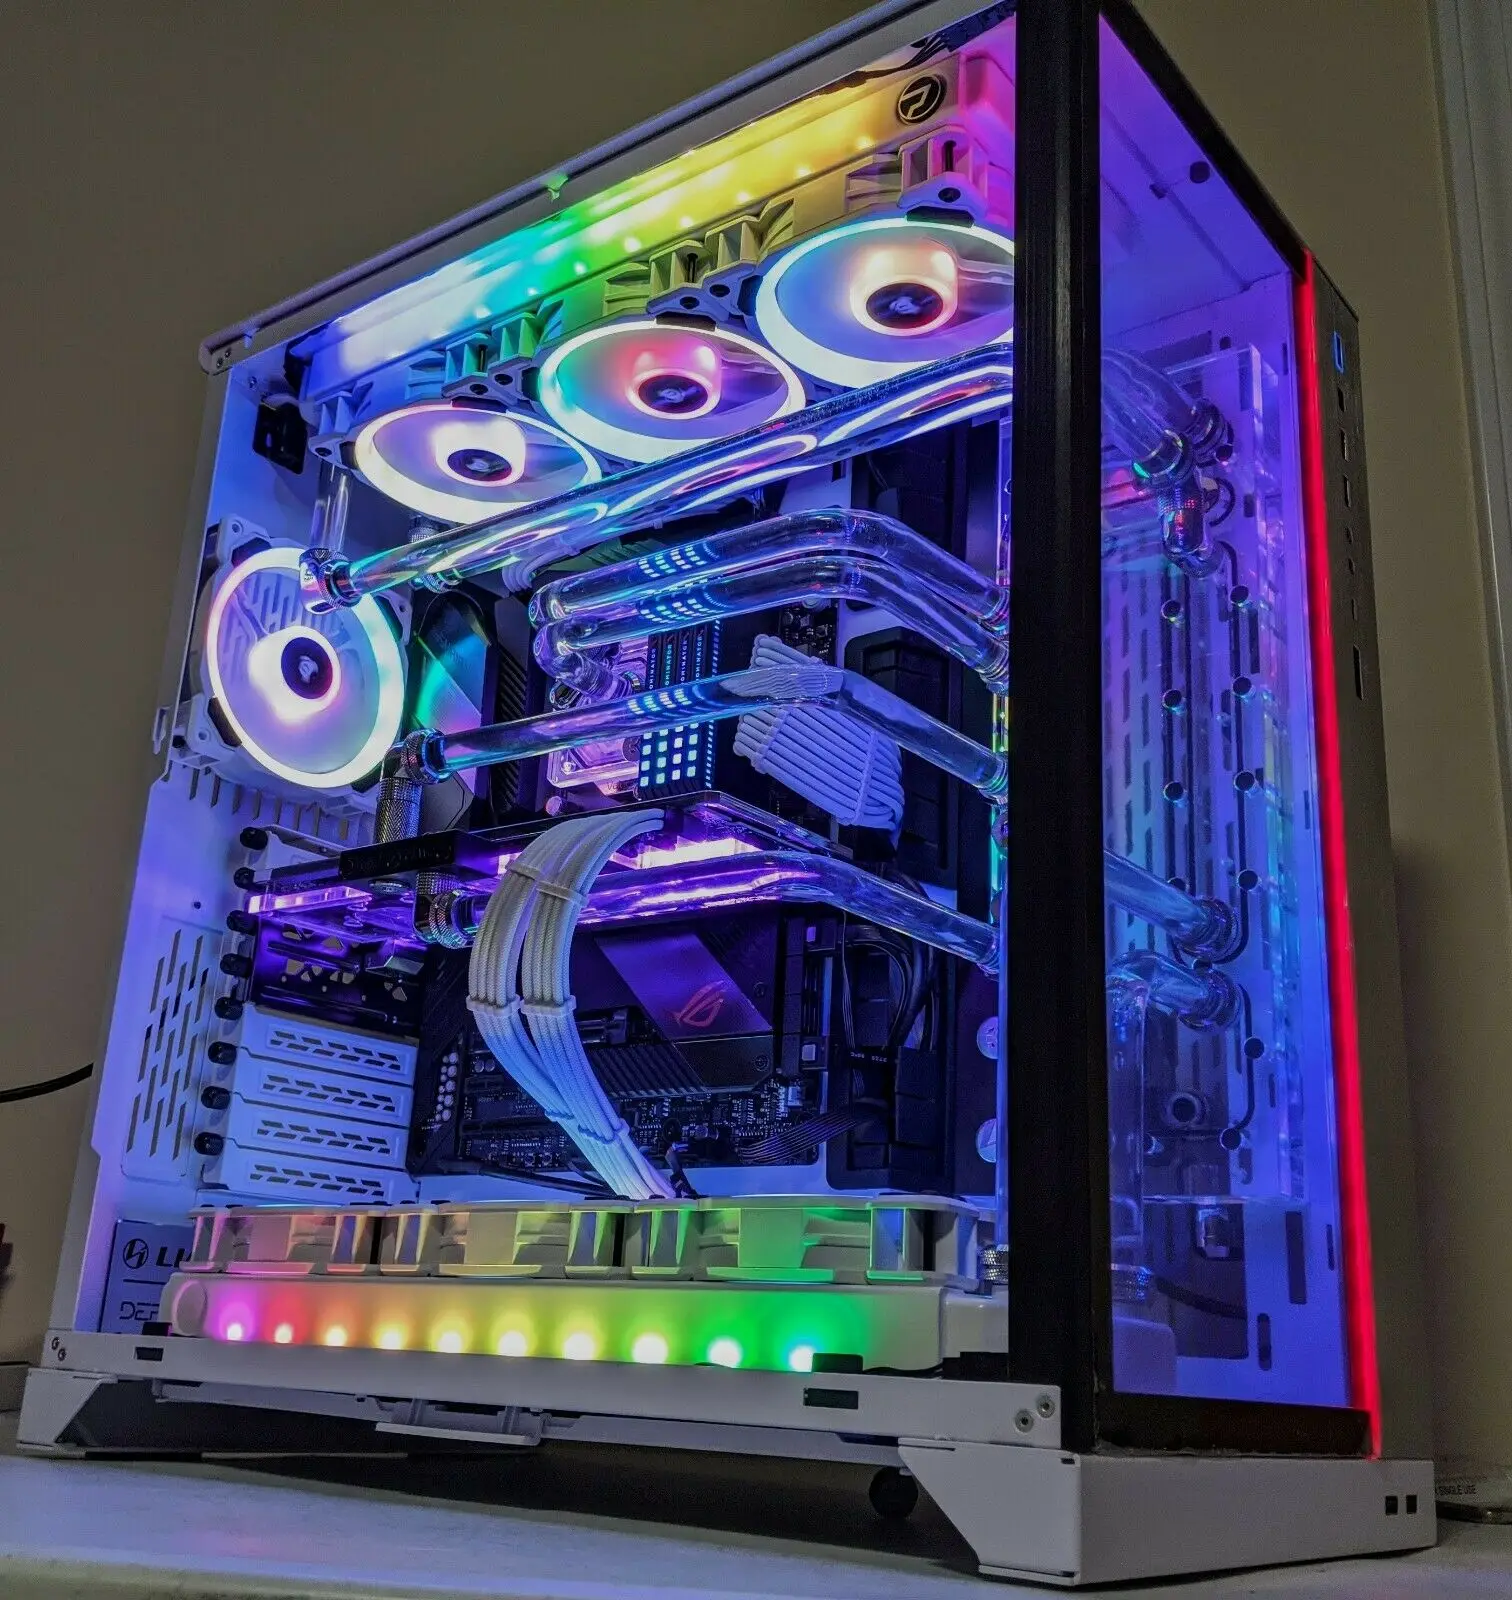 Ultimate Gaming Computer Pc - Custom Hardline Air Cooled Pc - 11900k - Rtx 3080 - 64gb Ram Rgb - Buy Gaming Pc,Gaming Computer,I9 Computer Pc Product on Alibaba.com